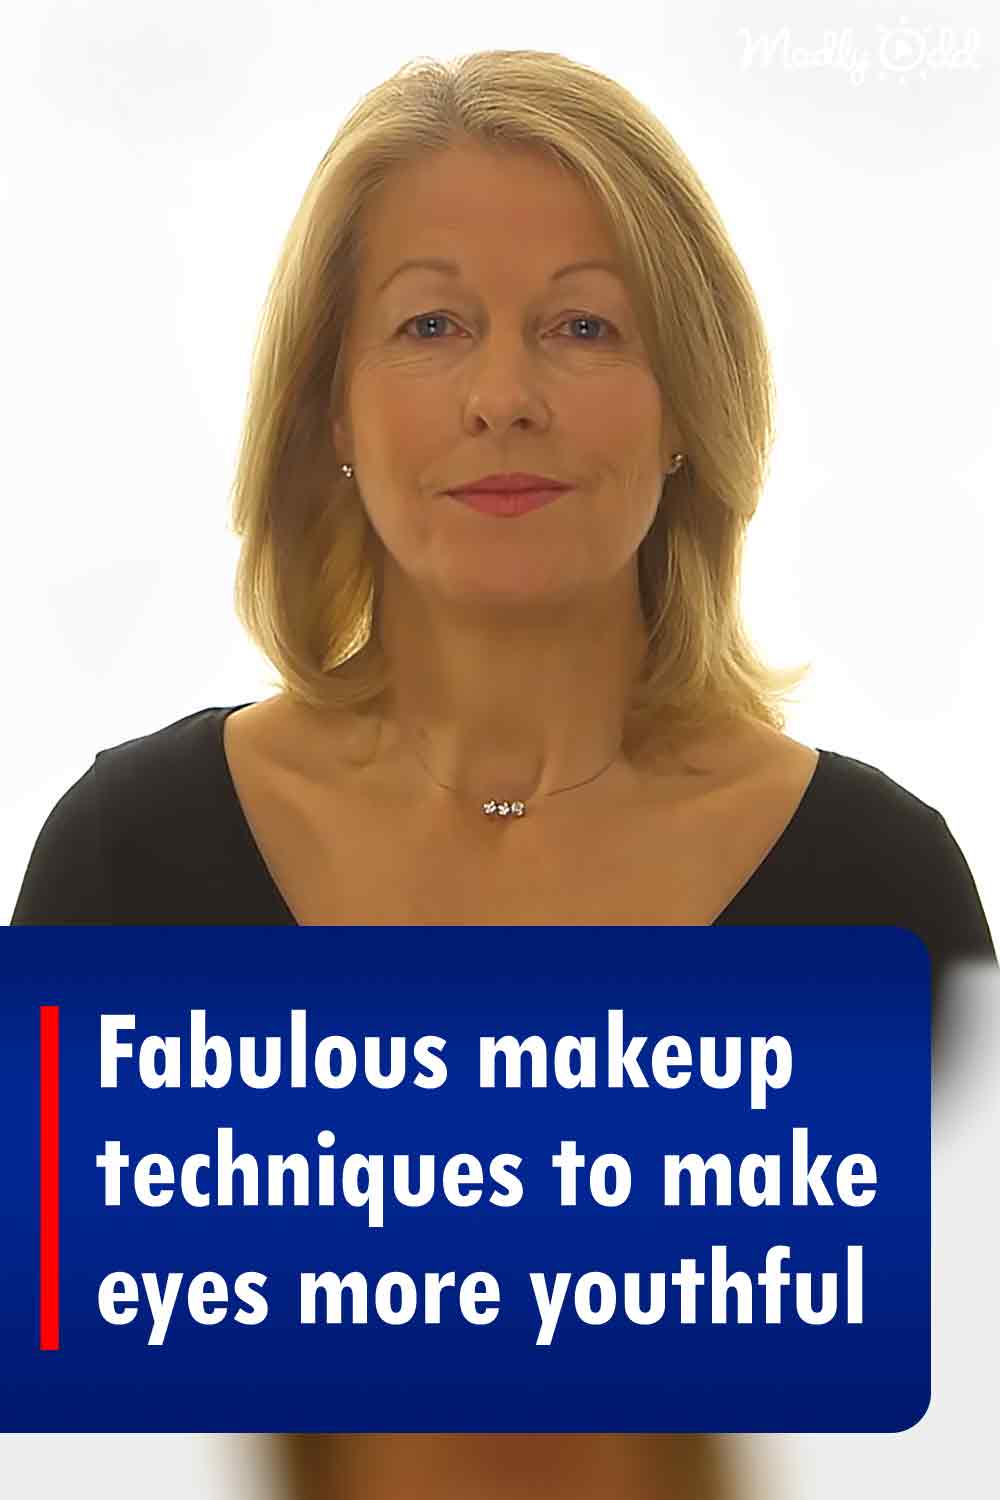 Fabulous makeup techniques to make eyes more youthful